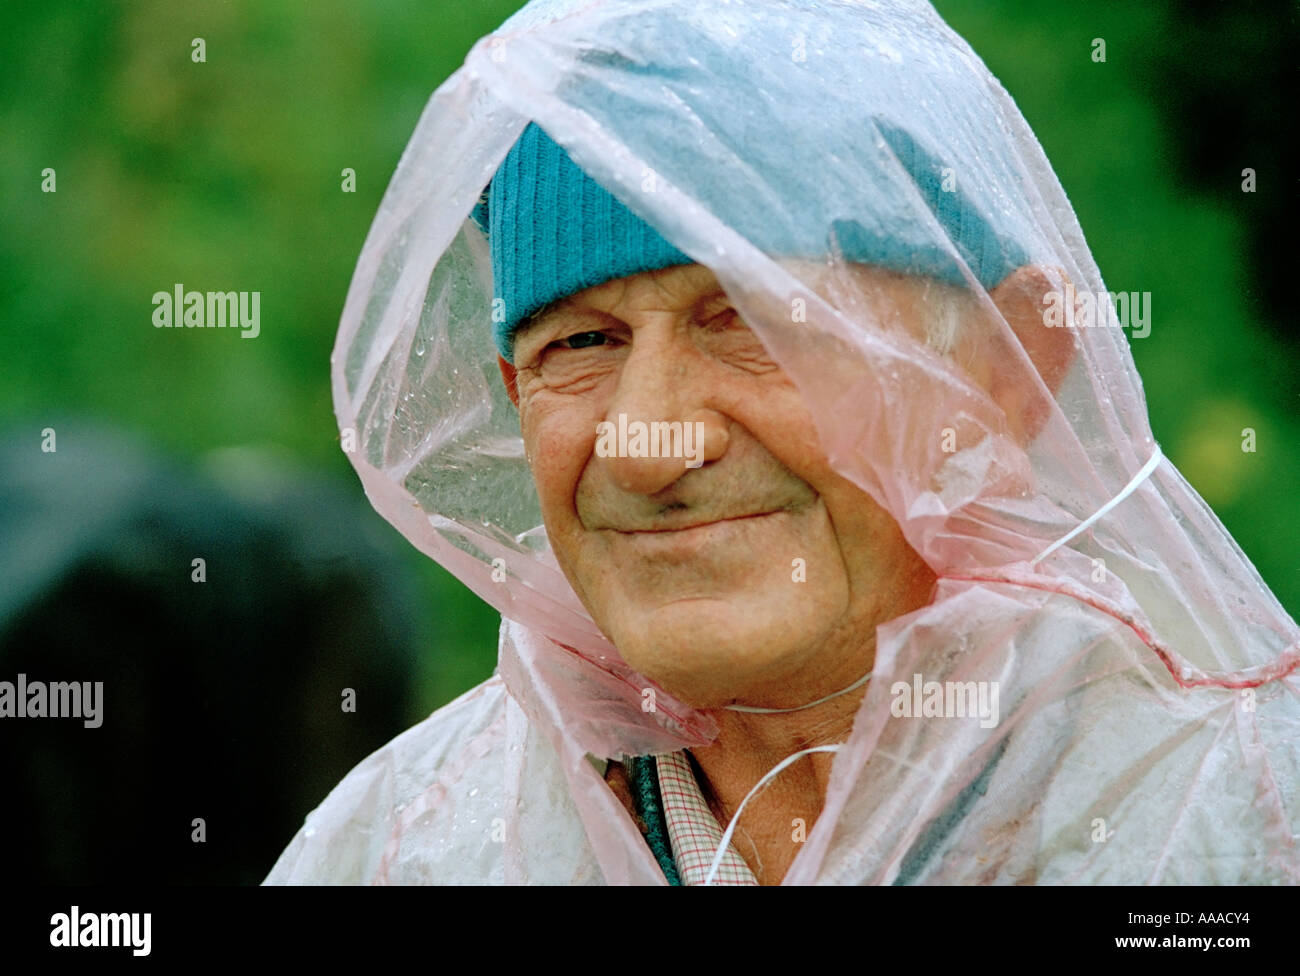 Bulgarian farmer wrapped in a plastic sheet for protection against the rain  Stock Photo - Alamy